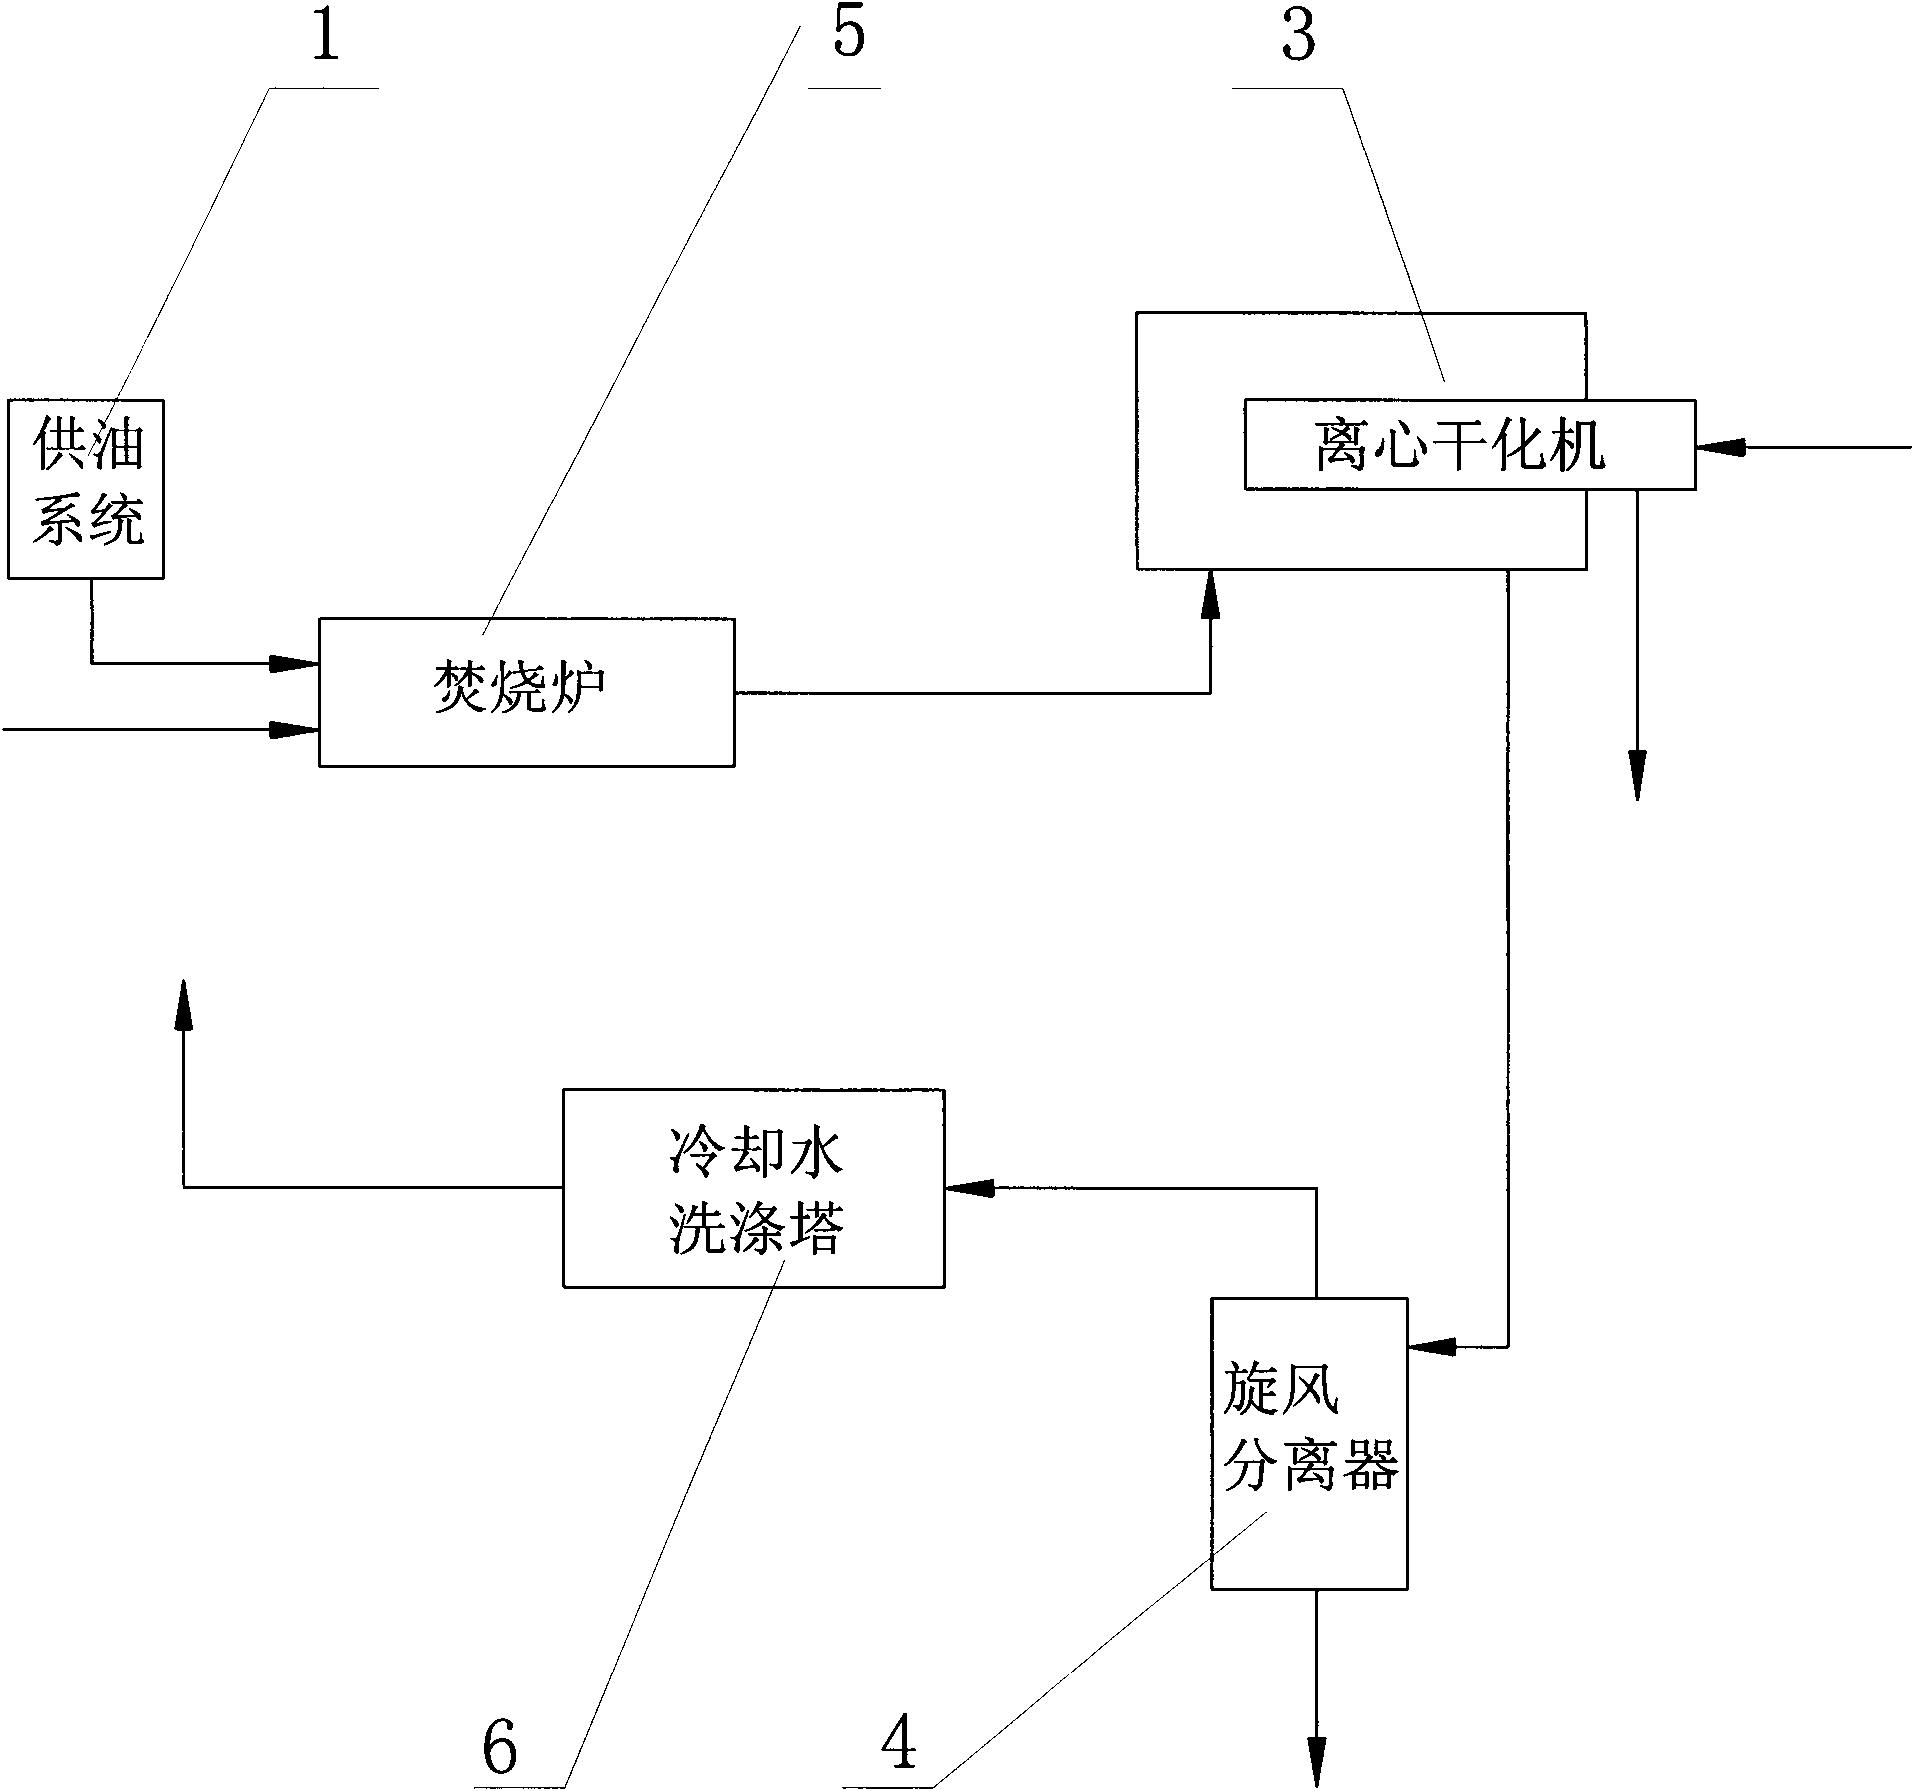 Method for sludge dehydration and drying